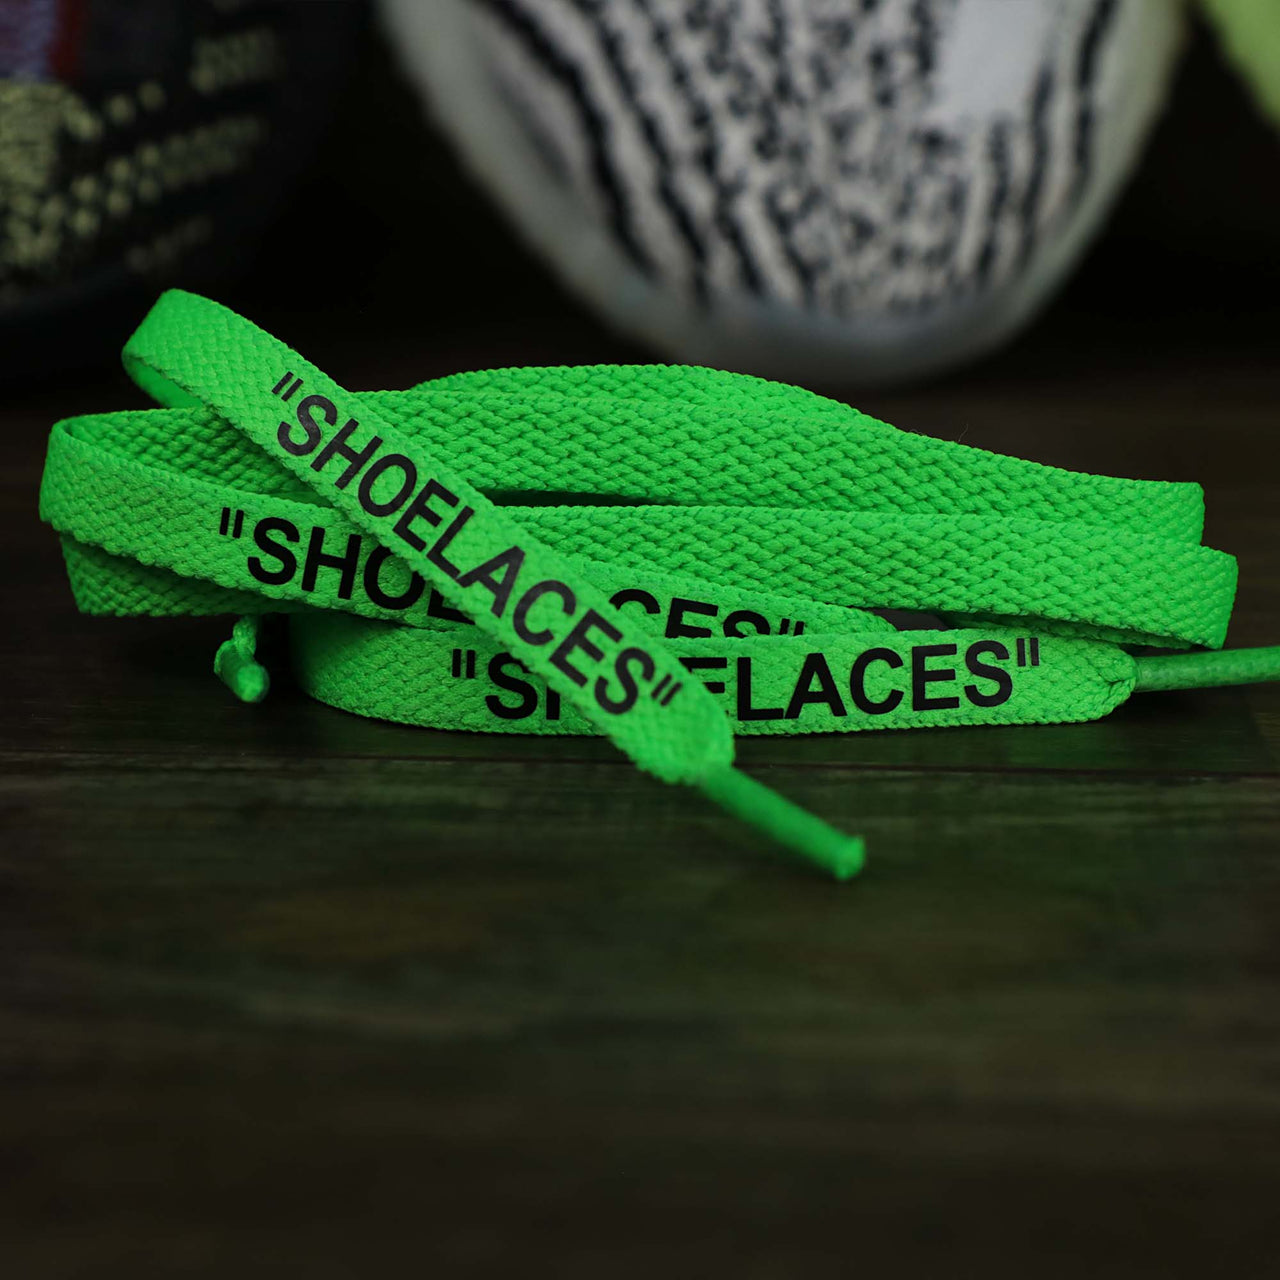 The Flat Neon Green Shoelaces with “Shoelaces” Print | 120cm Capswag unfolded